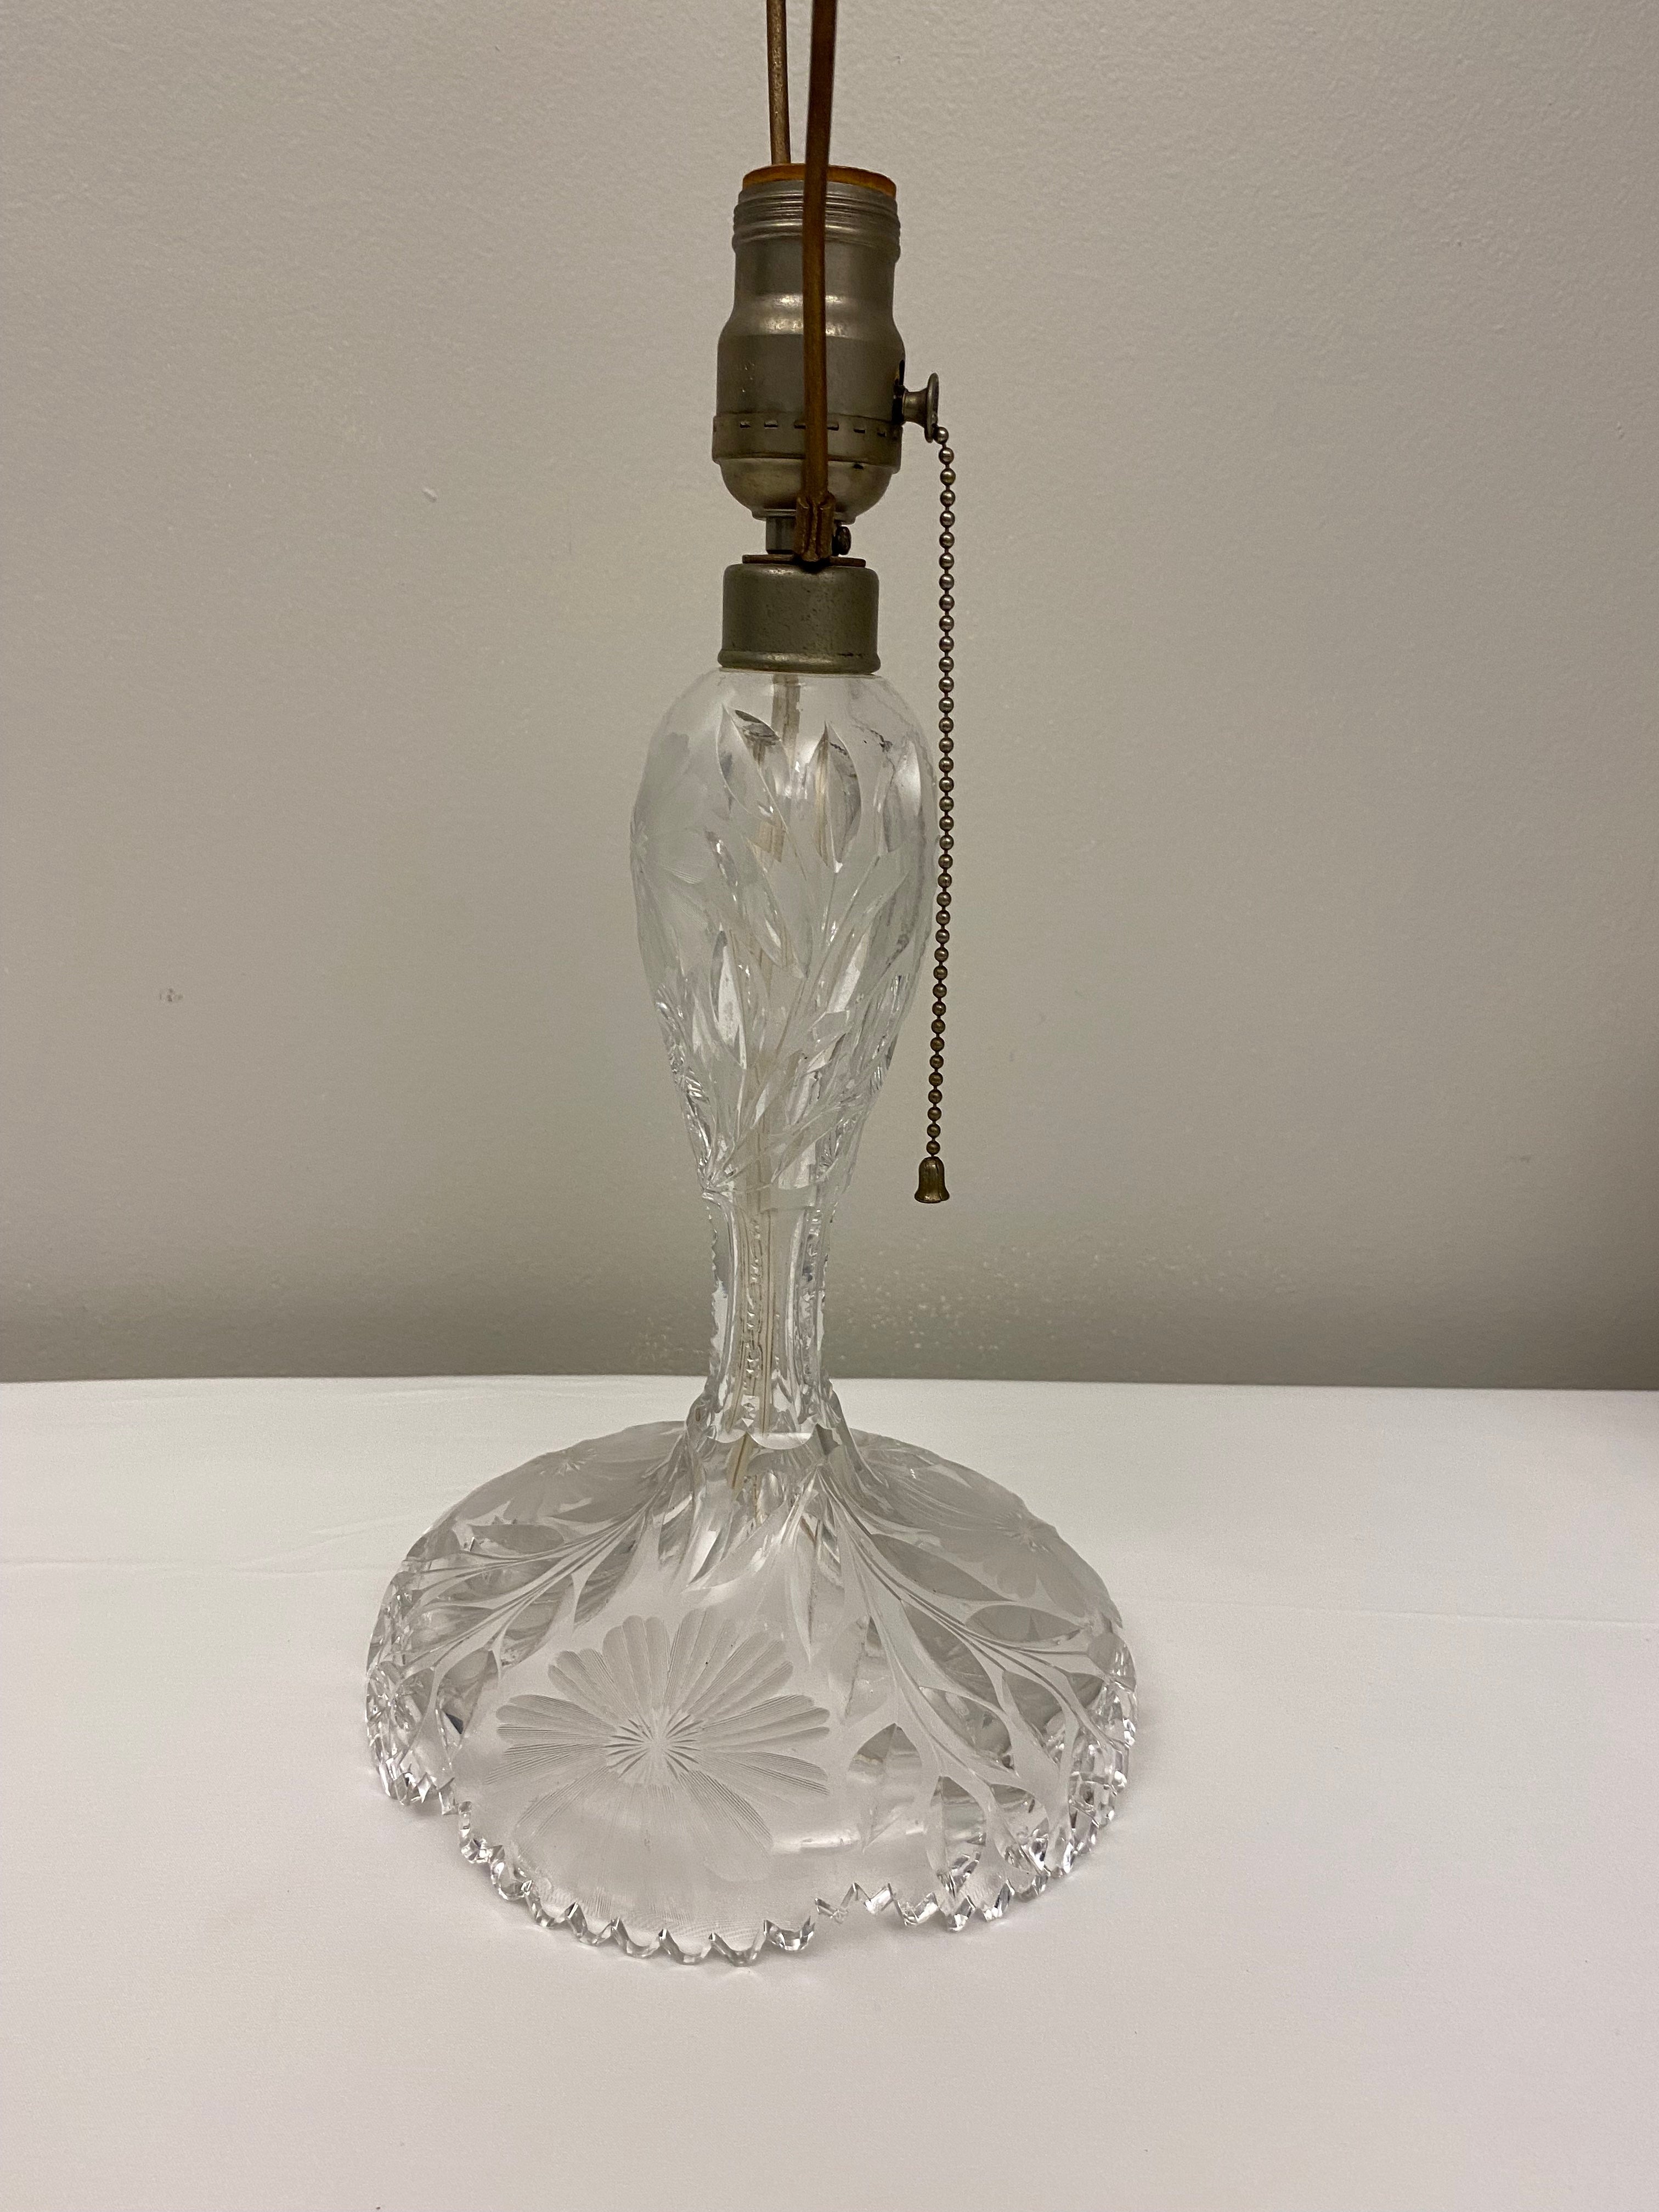 A fine French Art Deco Crystal Table Lamp cut and etched with intricate details in the manner of Baccarat.  

This very good quality antique French Art Deco Crystal table lamp will enhance any traditional or contemporary setting.

Measures: 22